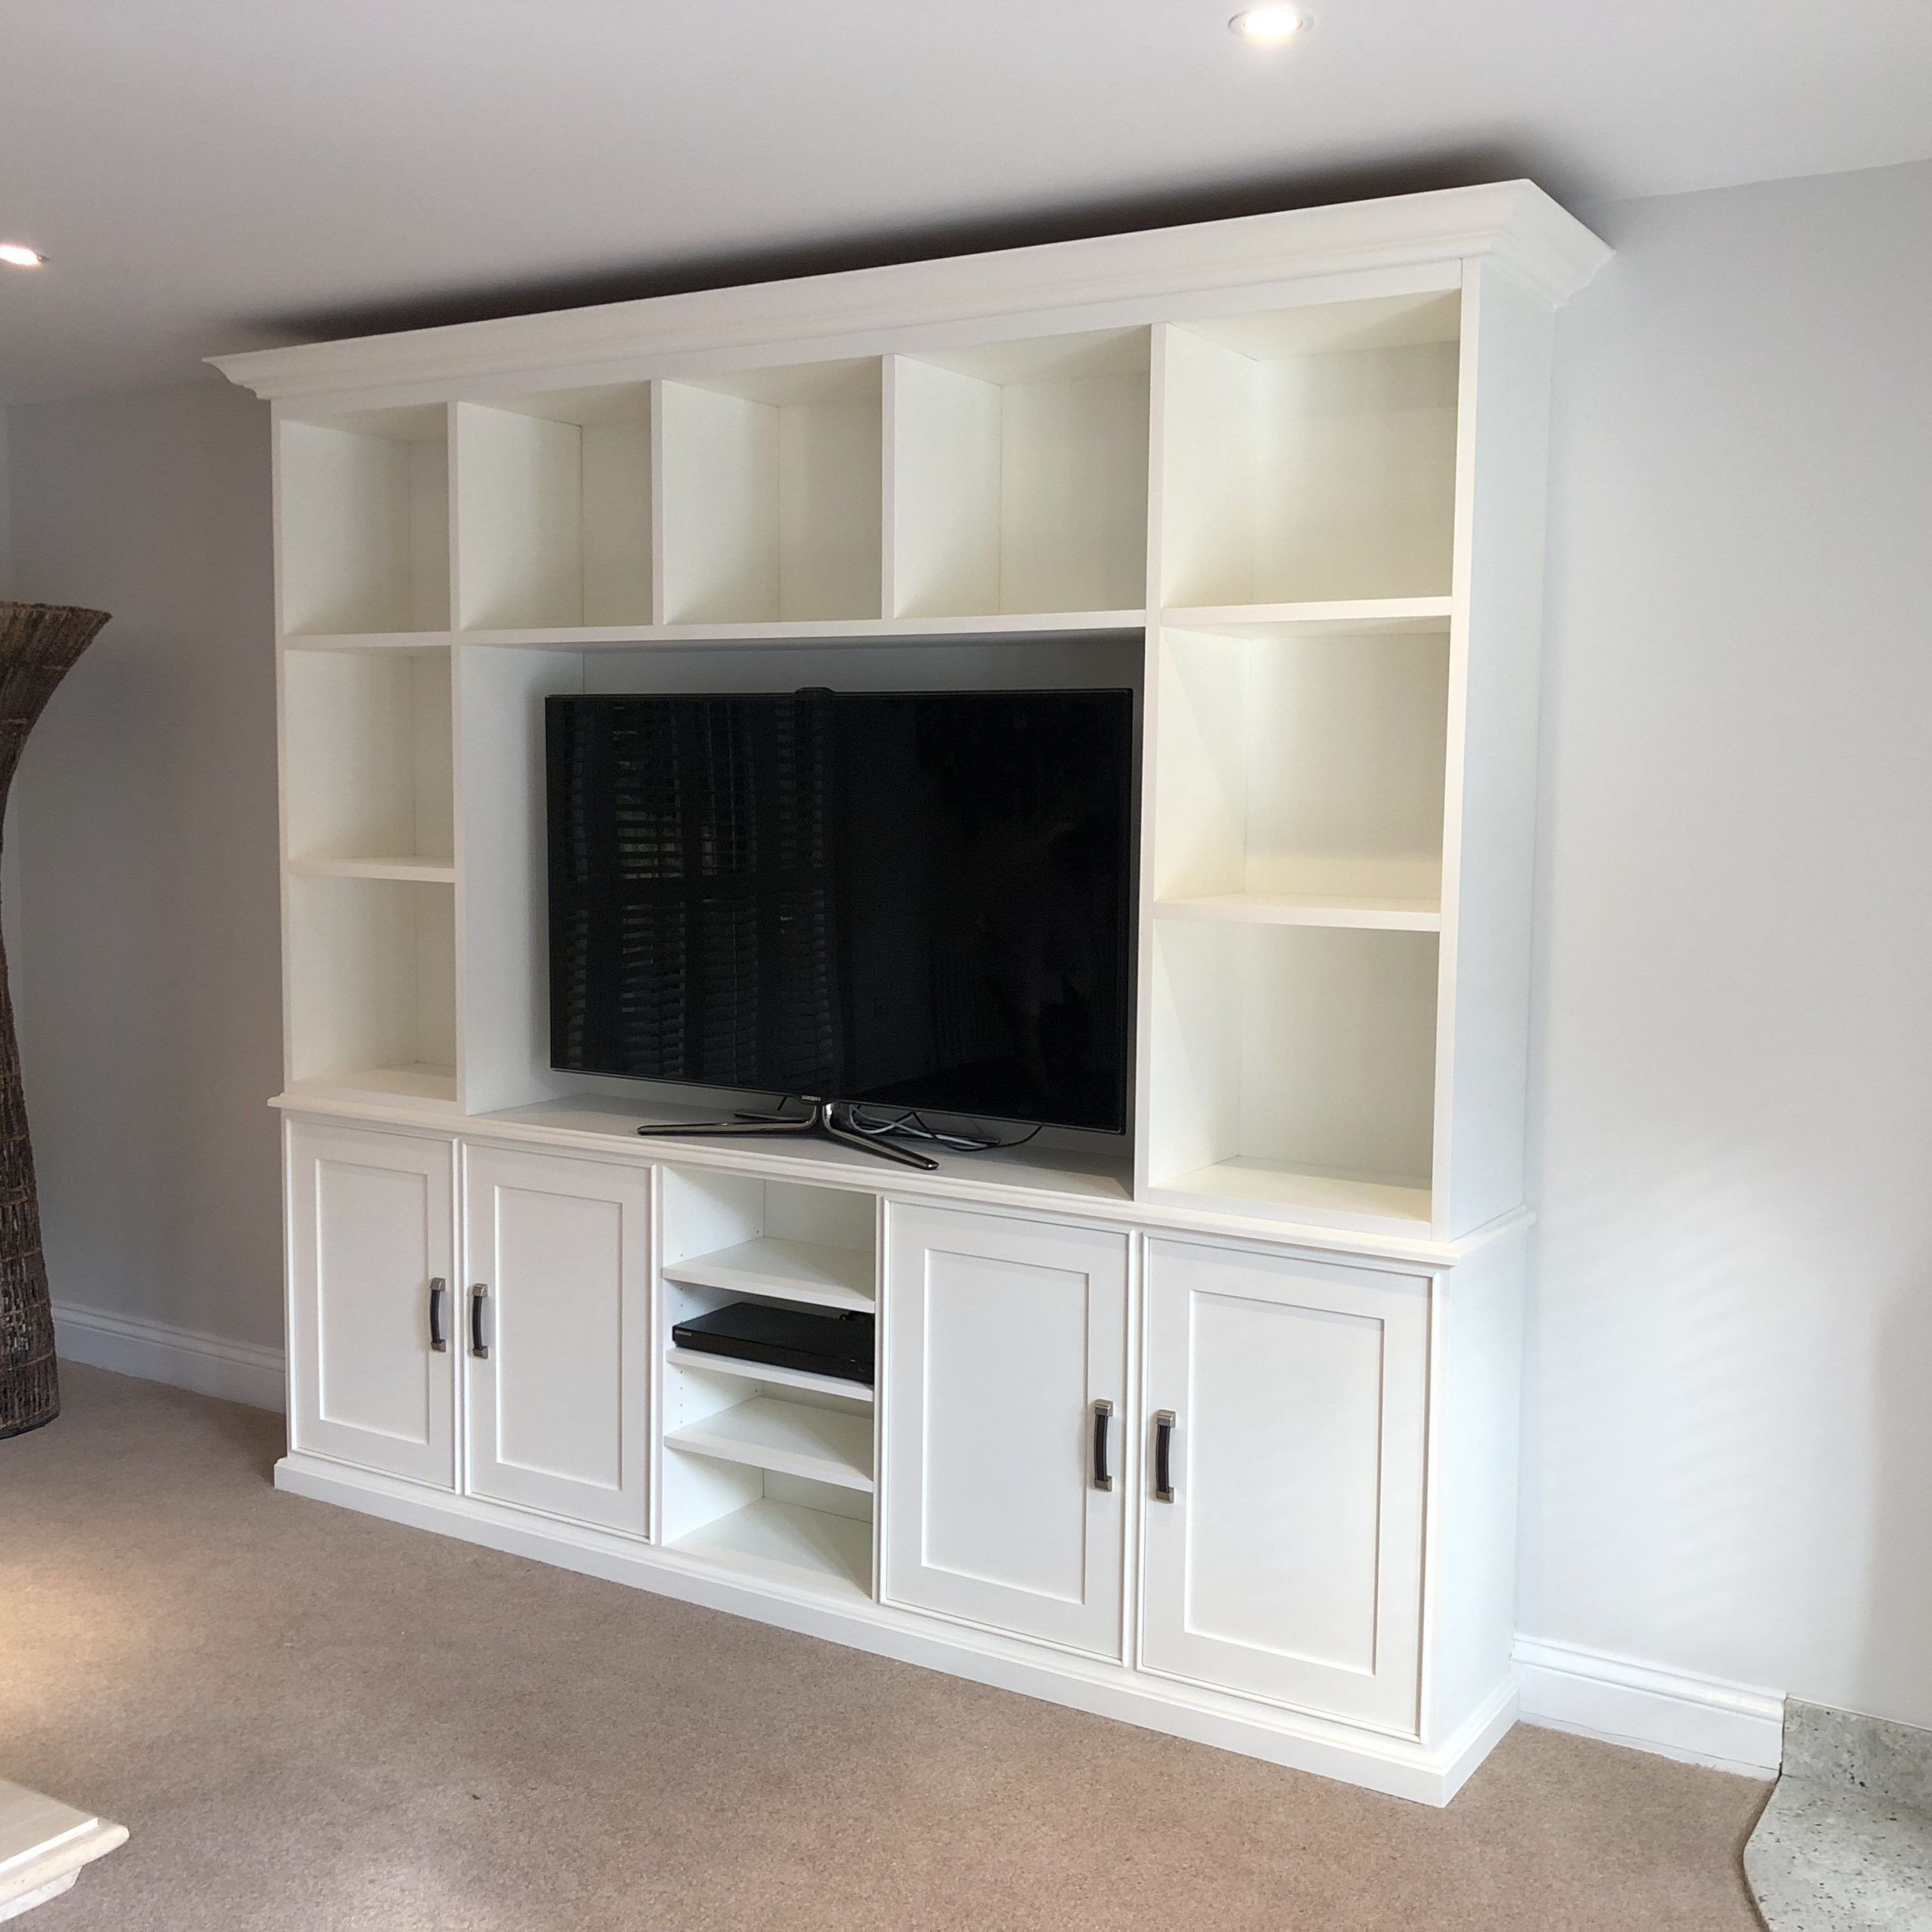 Bespoke Tv Wall Unit | Tv Wall Unit, Tv Cabinets, Wall Unit Intended For Wall Display Units And Tv Cabinets (View 4 of 15)